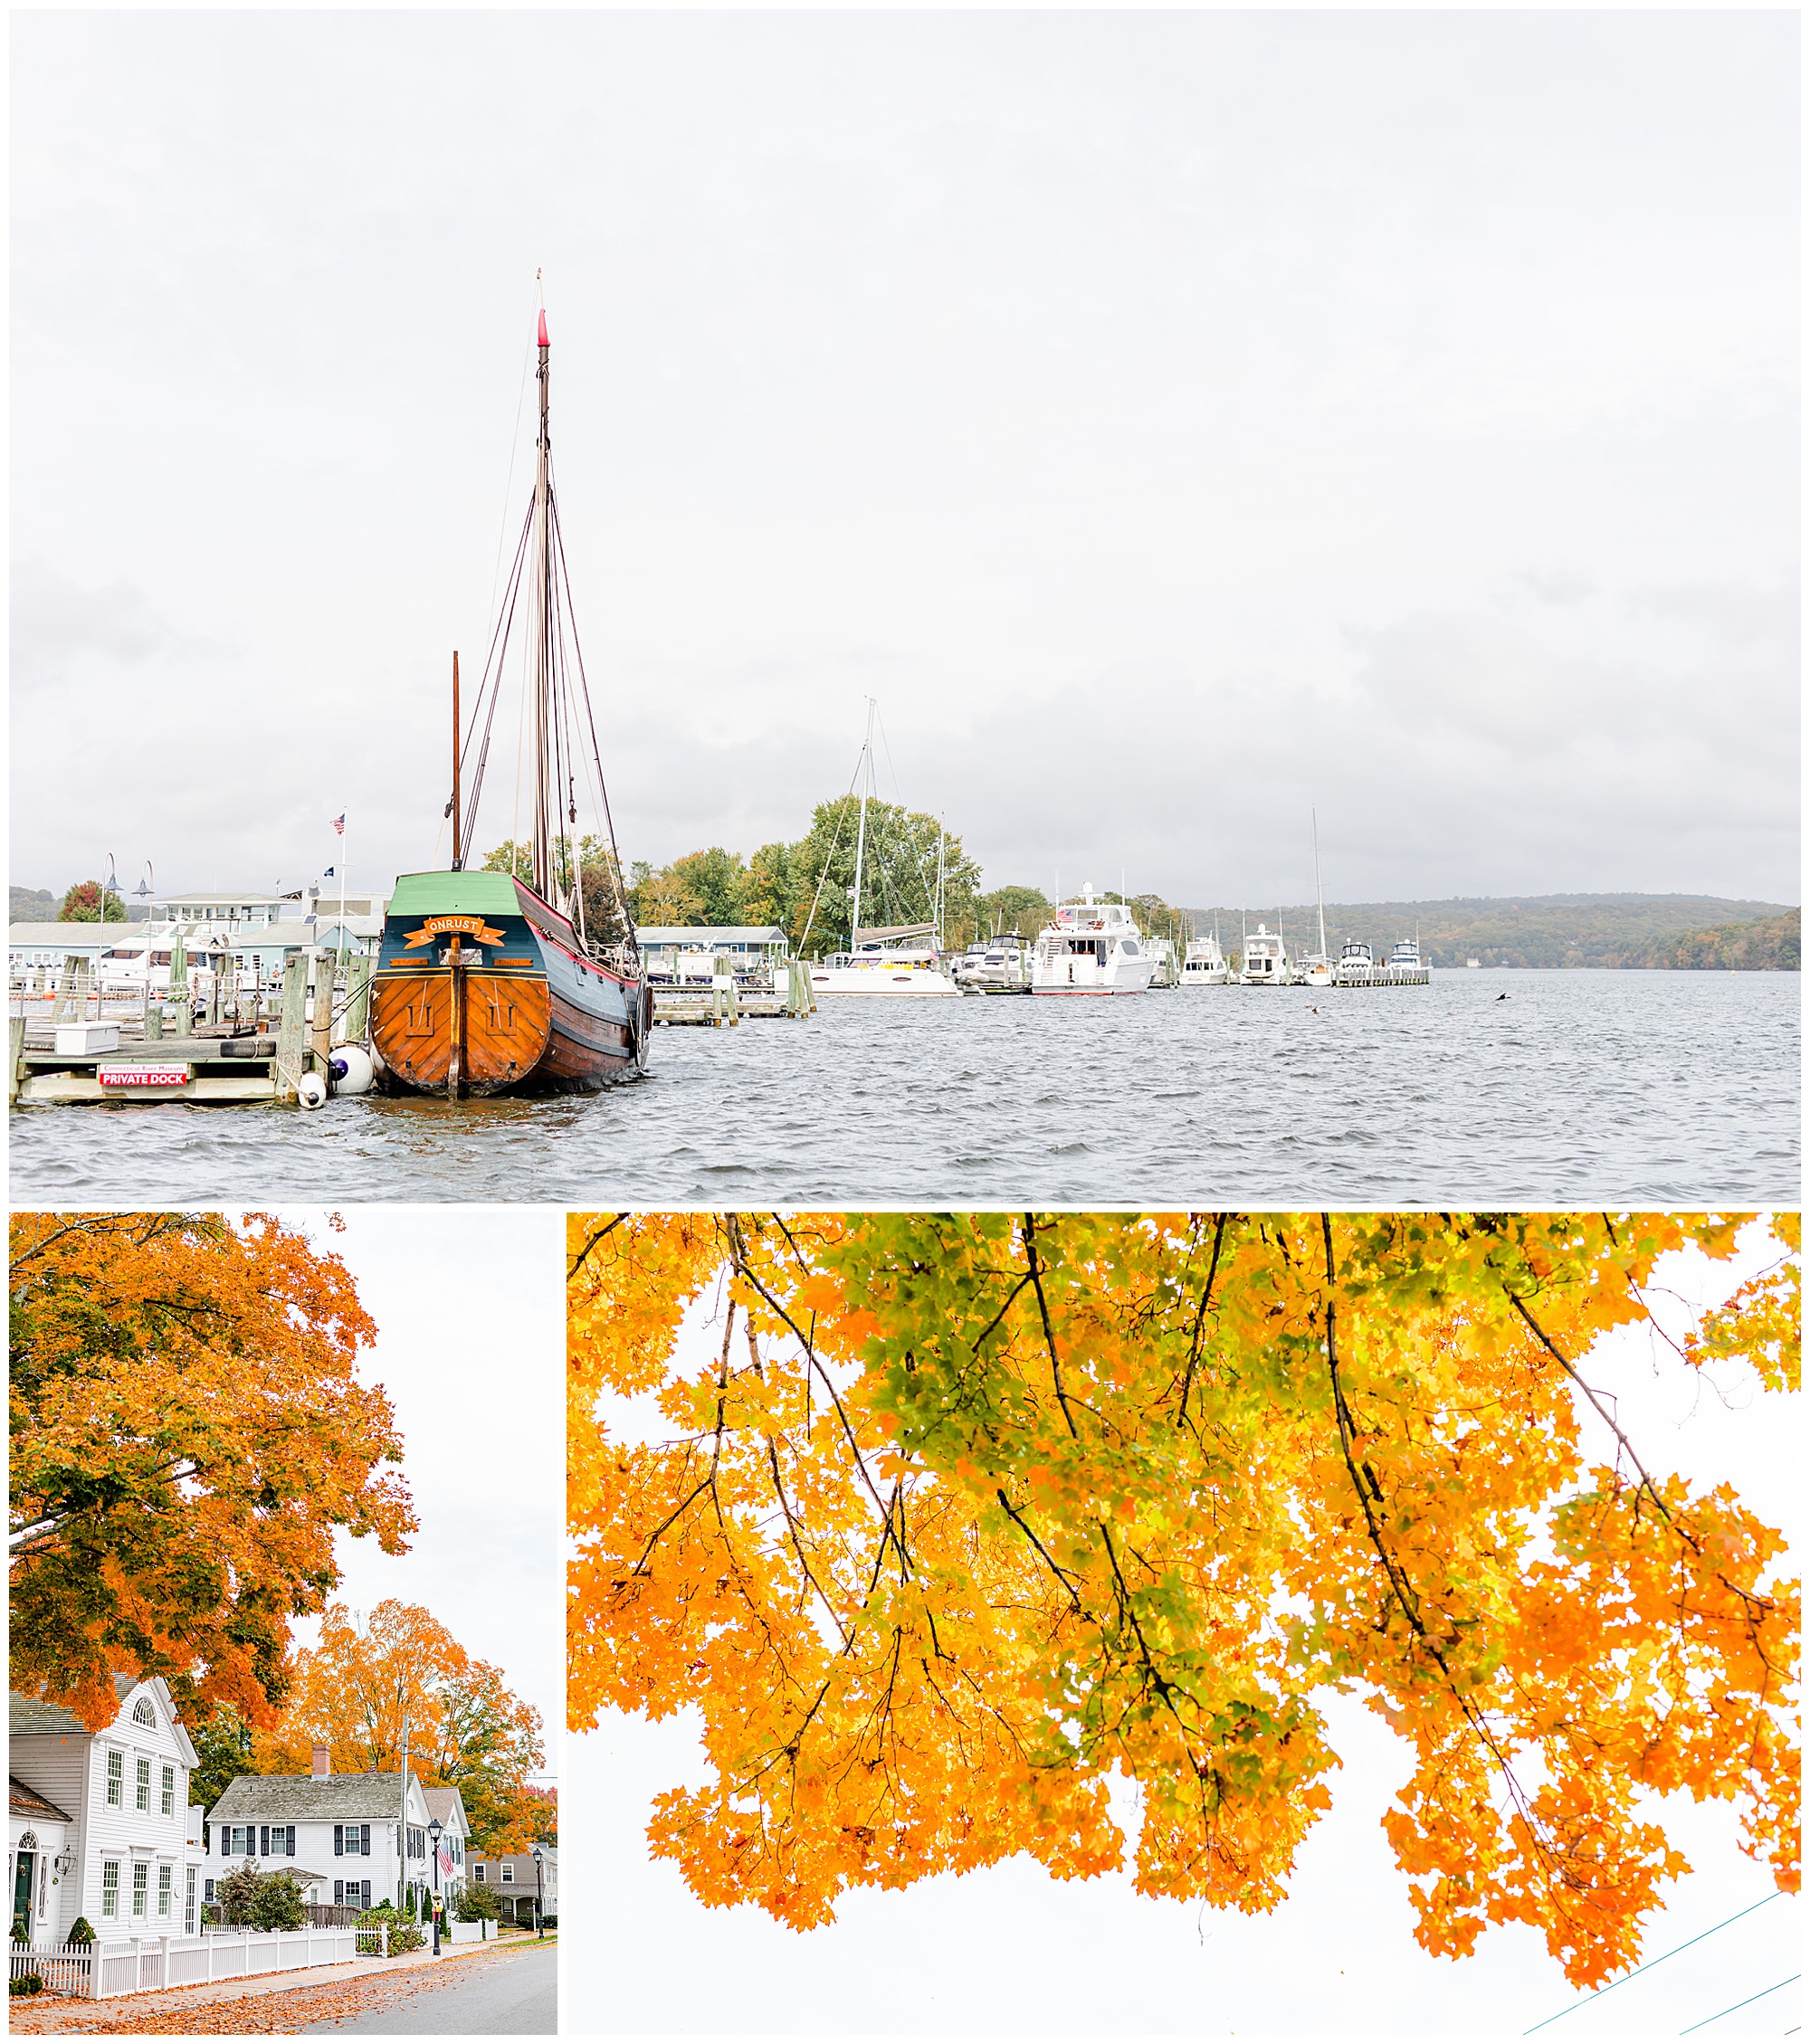 New England autumn prints, print shop, autumn photos, autumn prints, New England prints, Connecticut photos, Massachussetts photos, Rockport MA, Essex CT, the Headlands, waterfront prints, ocean prints, coastal New England prints, coastal prints, Rachel E.H. Photography Print Shop, landscape photography, orange and green gradient leaves, colorful boat, boat in harbor, white houses on street